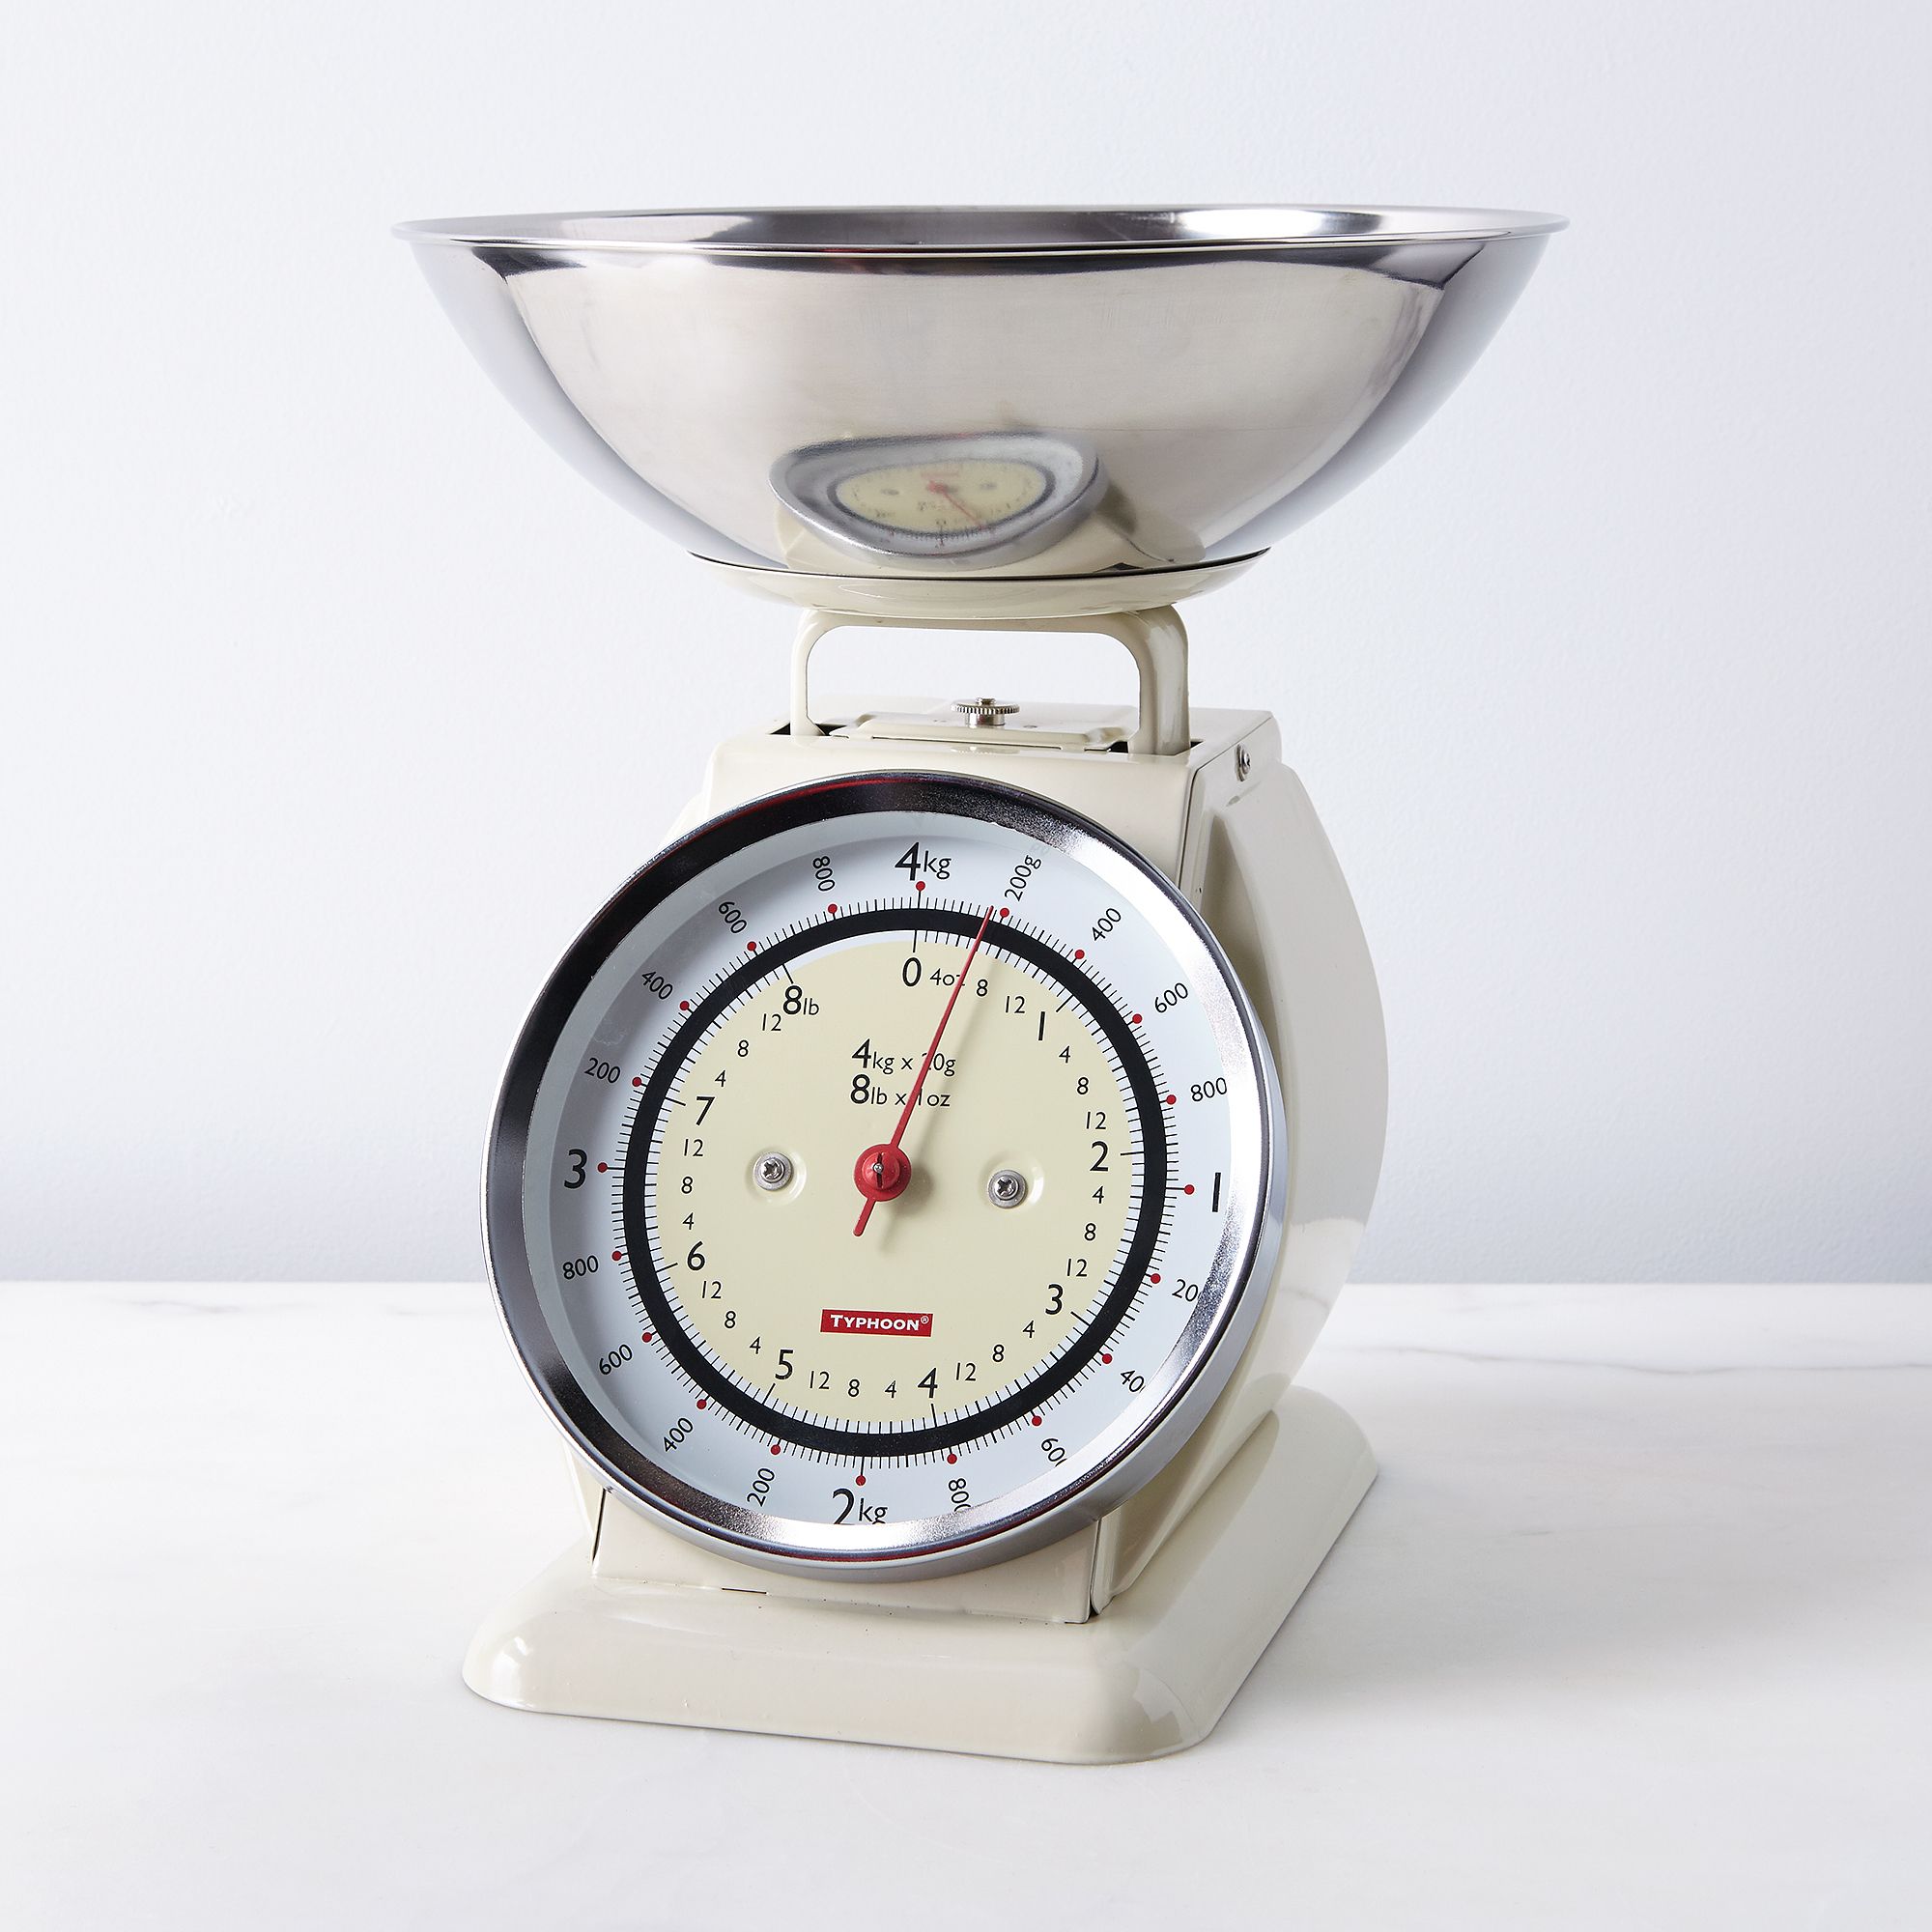 Vintage Style Kitchen Scale With Removable Bowl On Food52